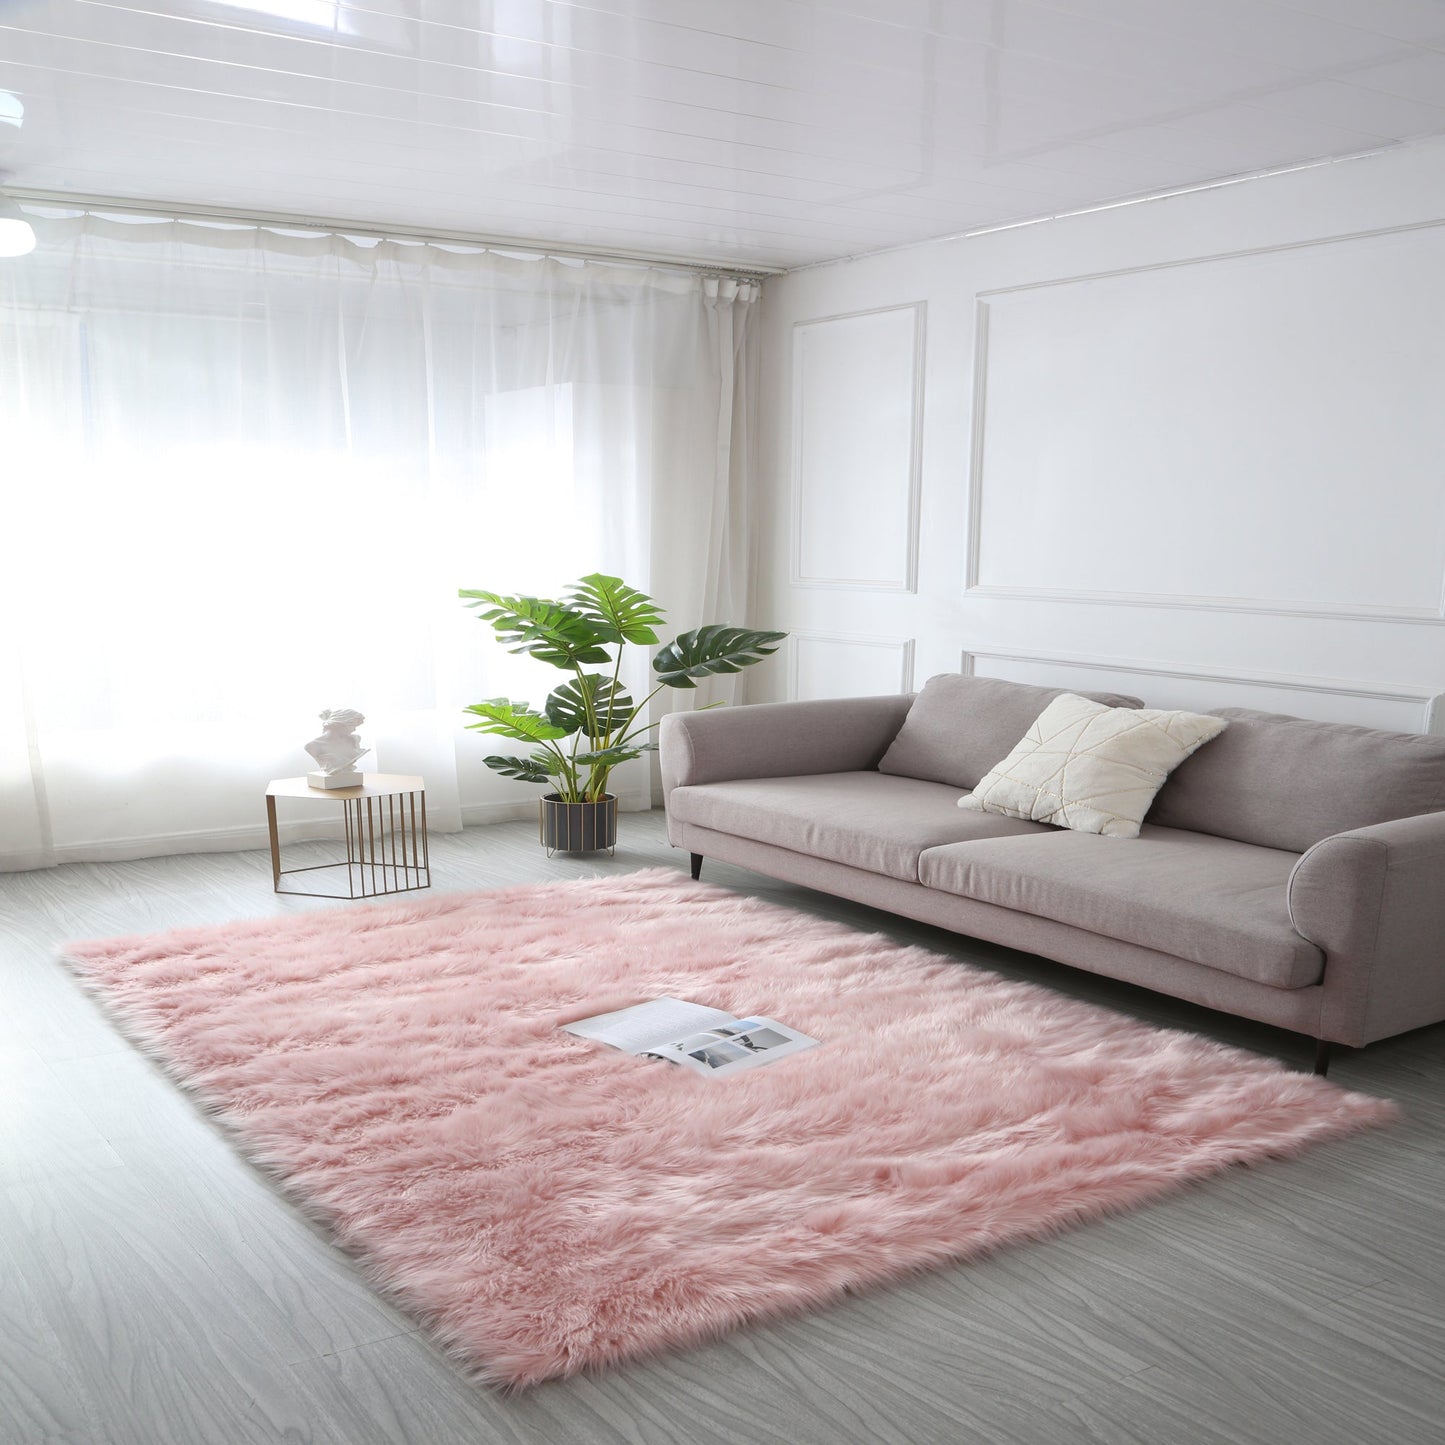 Cozy Ultra Soft Fluffy Faux Fur Pink Area Rug